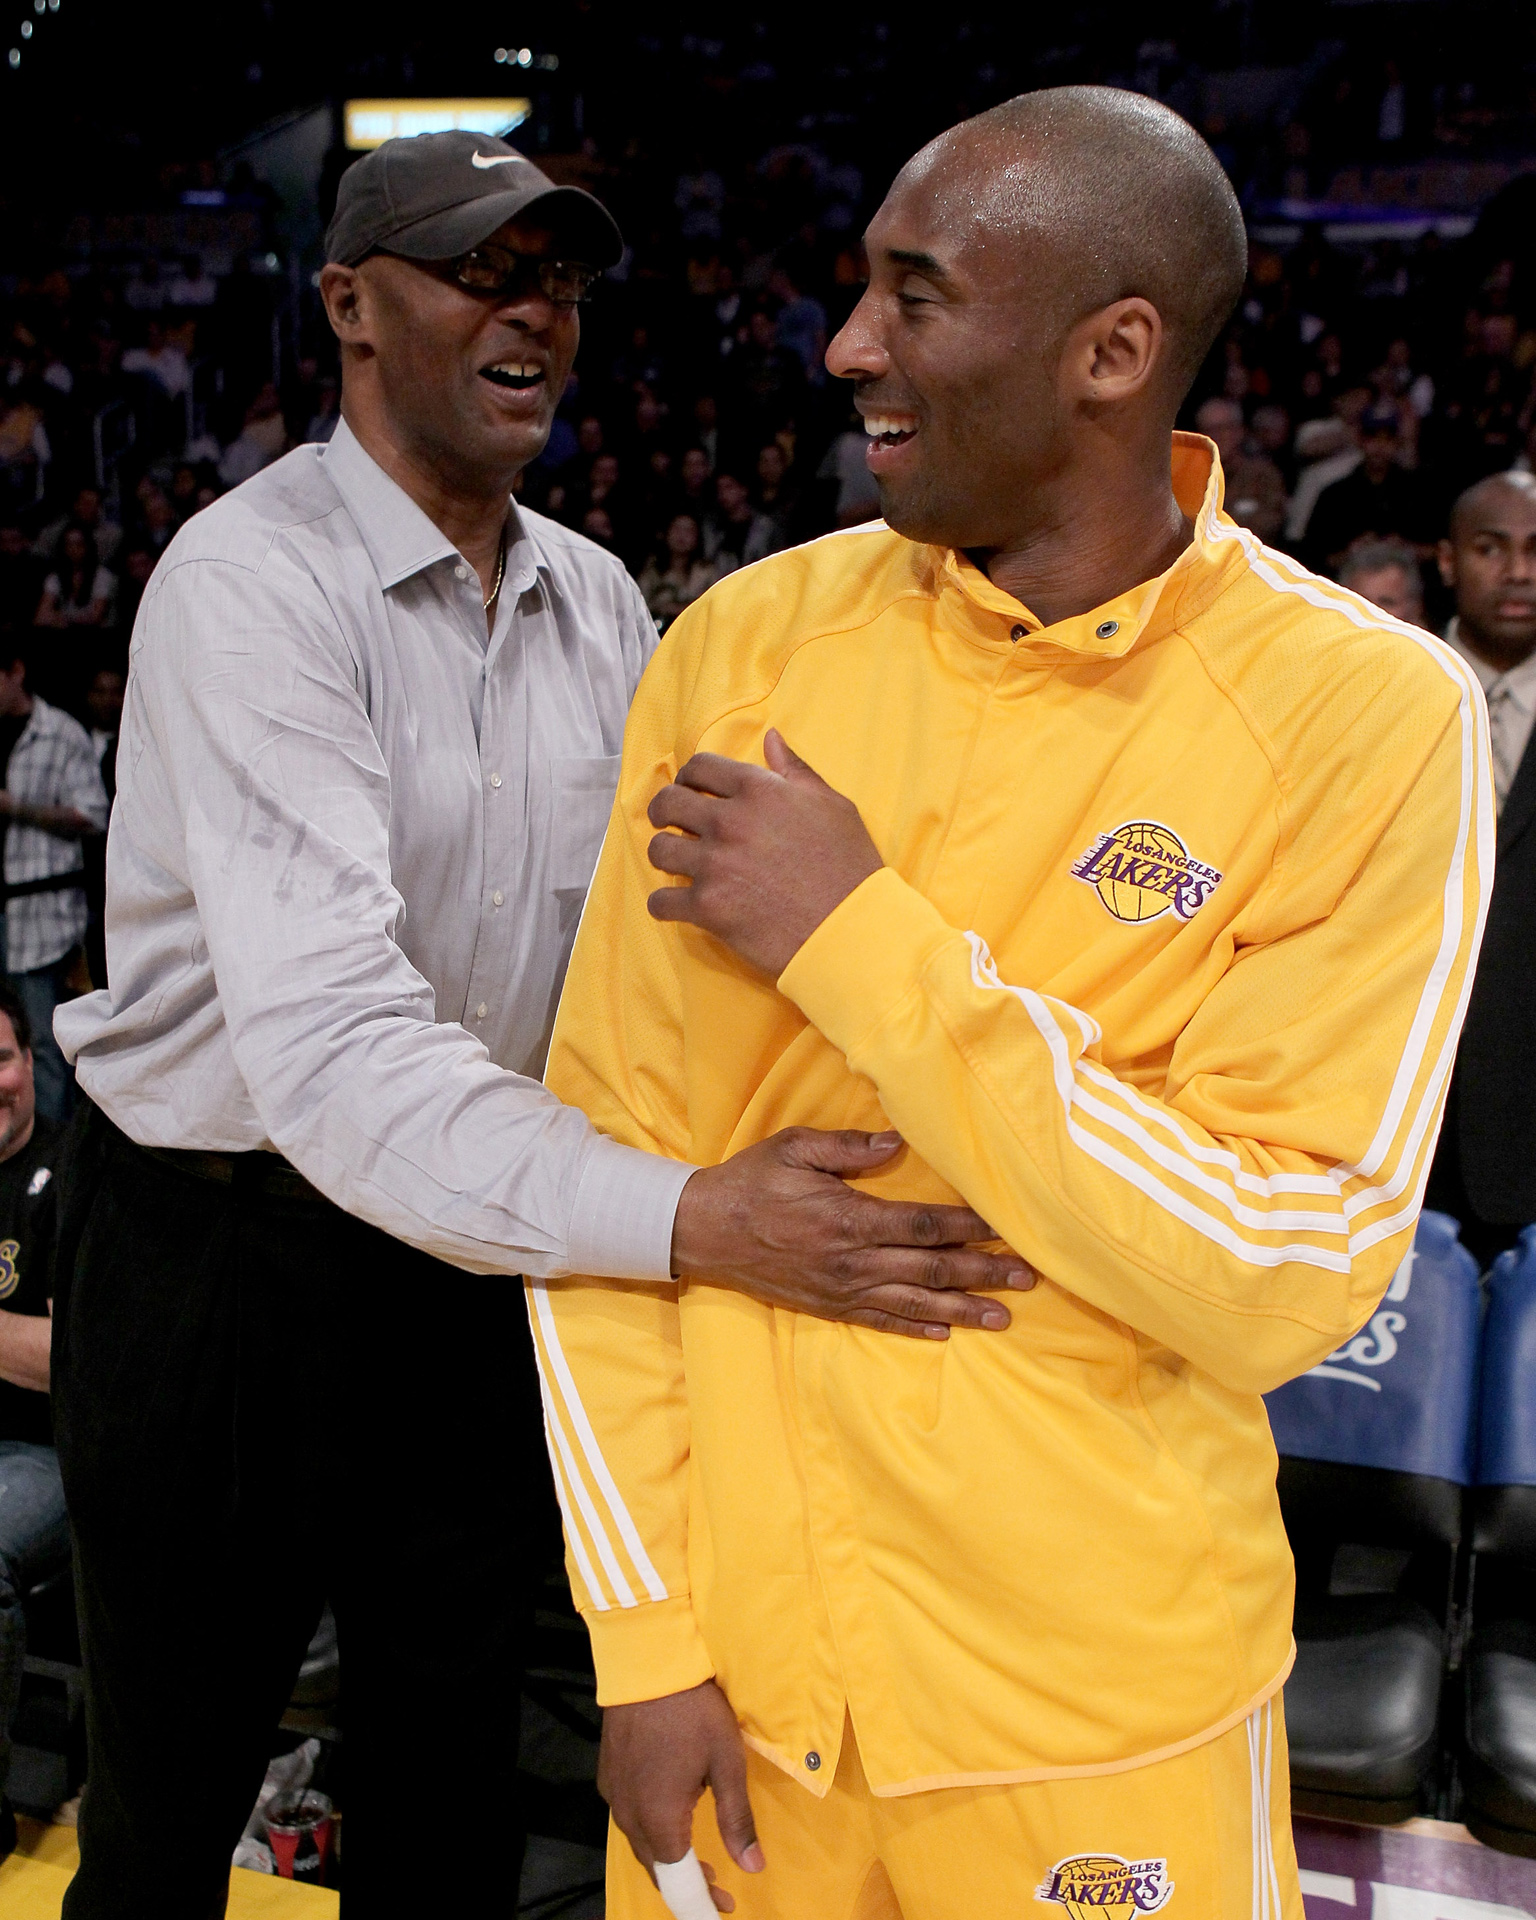 Top Sports Biography Wallpapers Images Pictures : Kobe Bryant